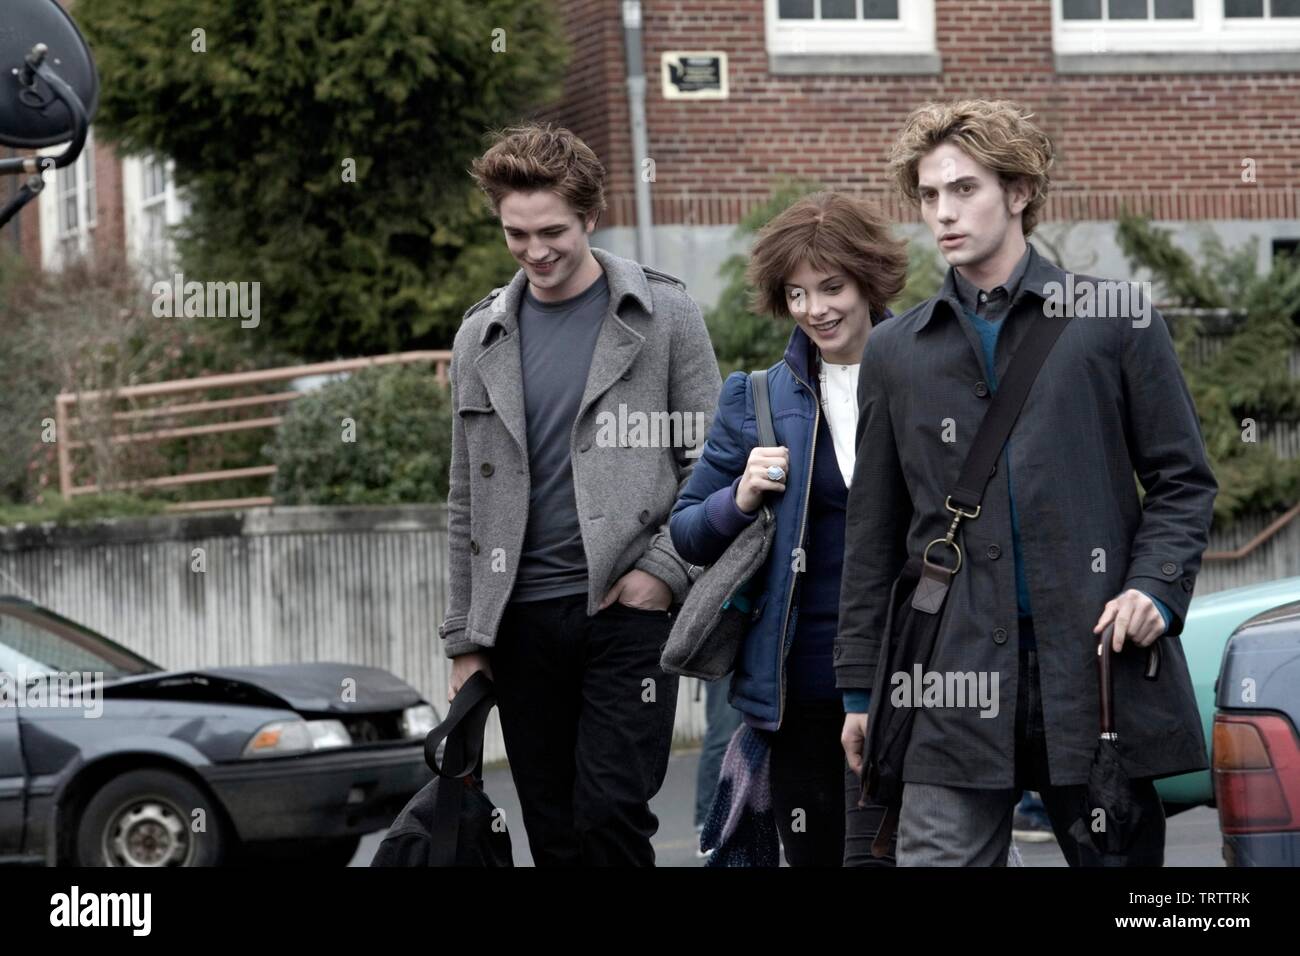 ROBERT PATTINSON , ASHLEY GREENE and JACKSON RATHBONE in TWILIGHT (2008). Copyright: Editorial use only. No merchandising or book covers. This is a publicly distributed handout. Access rights only, no license of copyright provided. Only to be reproduced in conjunction with promotion of this film. Credit: IMPRINT ENTERTAINMENT/MAVERICK FILMS/SUMMIT ENTERTAINMENT/ / Album Stock Photo